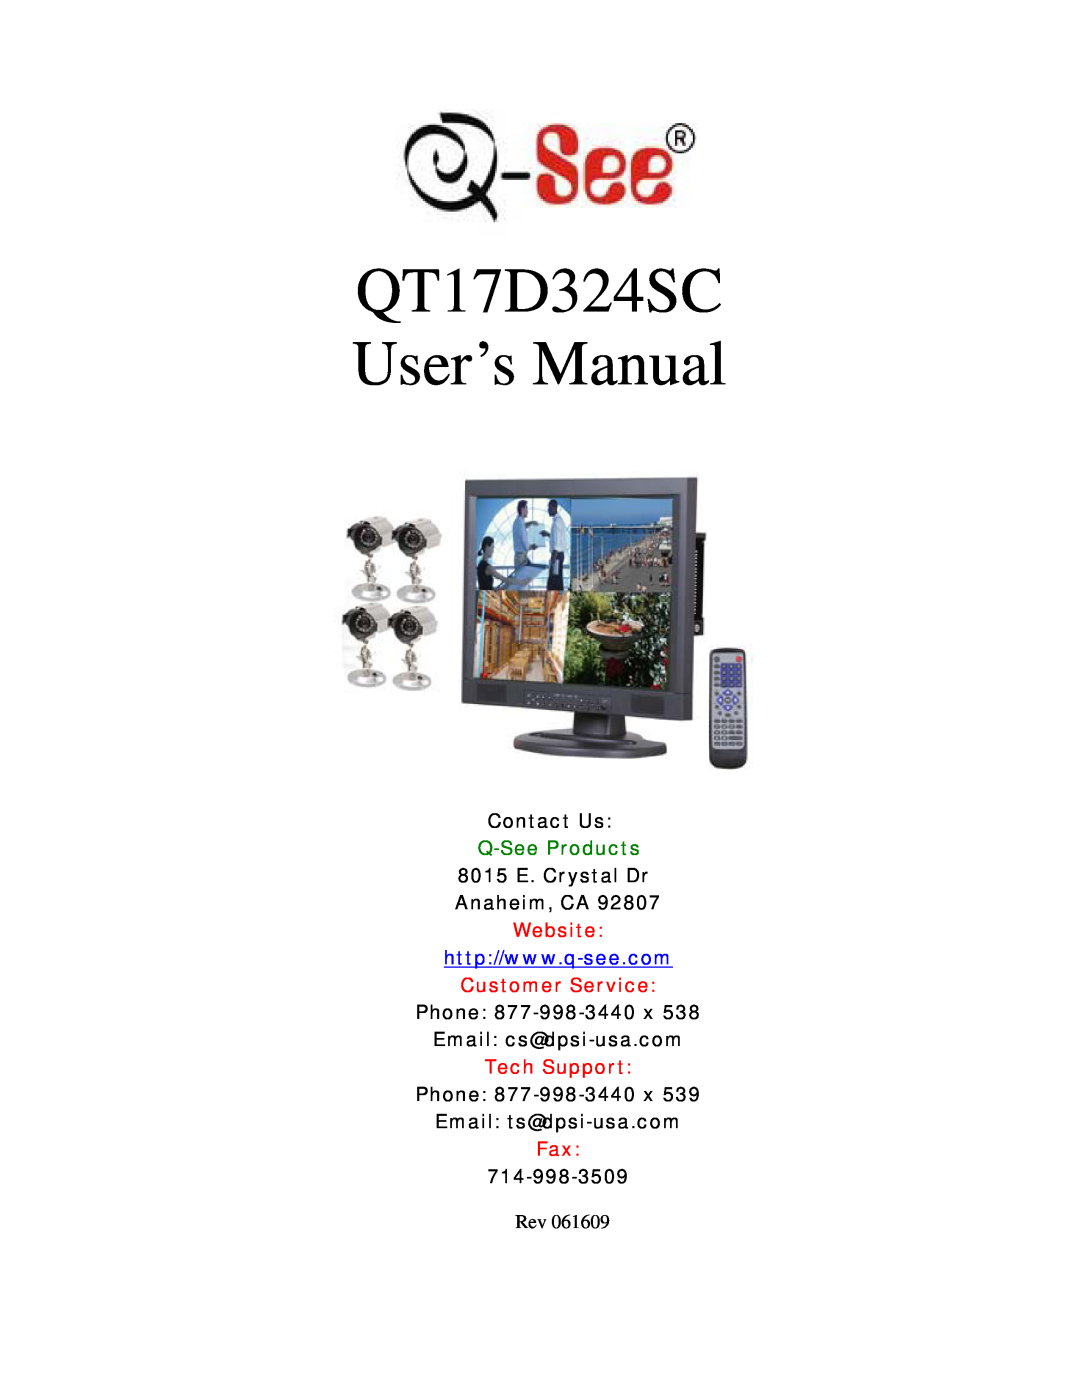 Q-See user manual QT17D324SC User’s Manual, Contact Us, Q-See Products, 8015 E. Crystal Dr Anaheim, CA, Website 